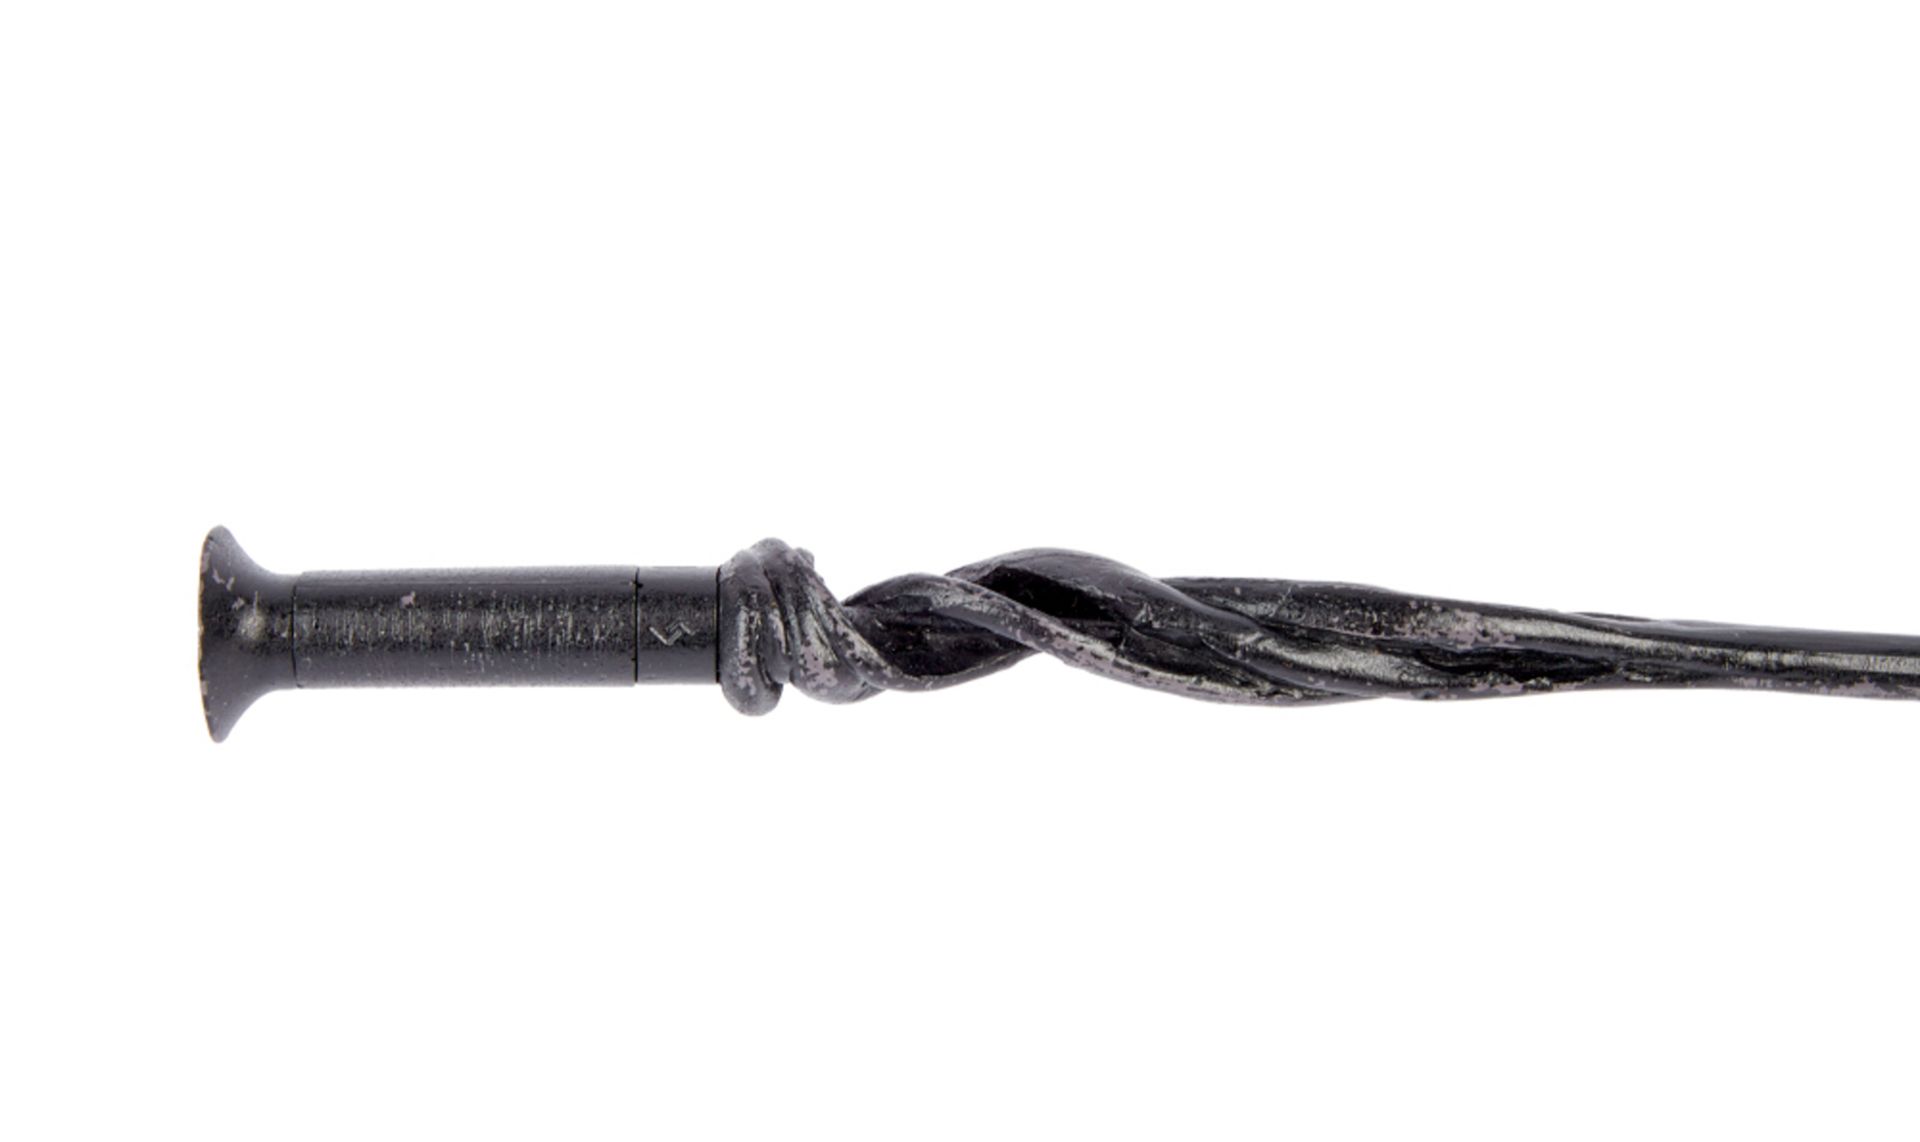 FANTASTIC BEASTS - THE SECRETS OF DUMBLEDORE | JUDE LAW "ALBUS DUMBLEDORE" UNFINISHED WAND PROP - Image 6 of 7